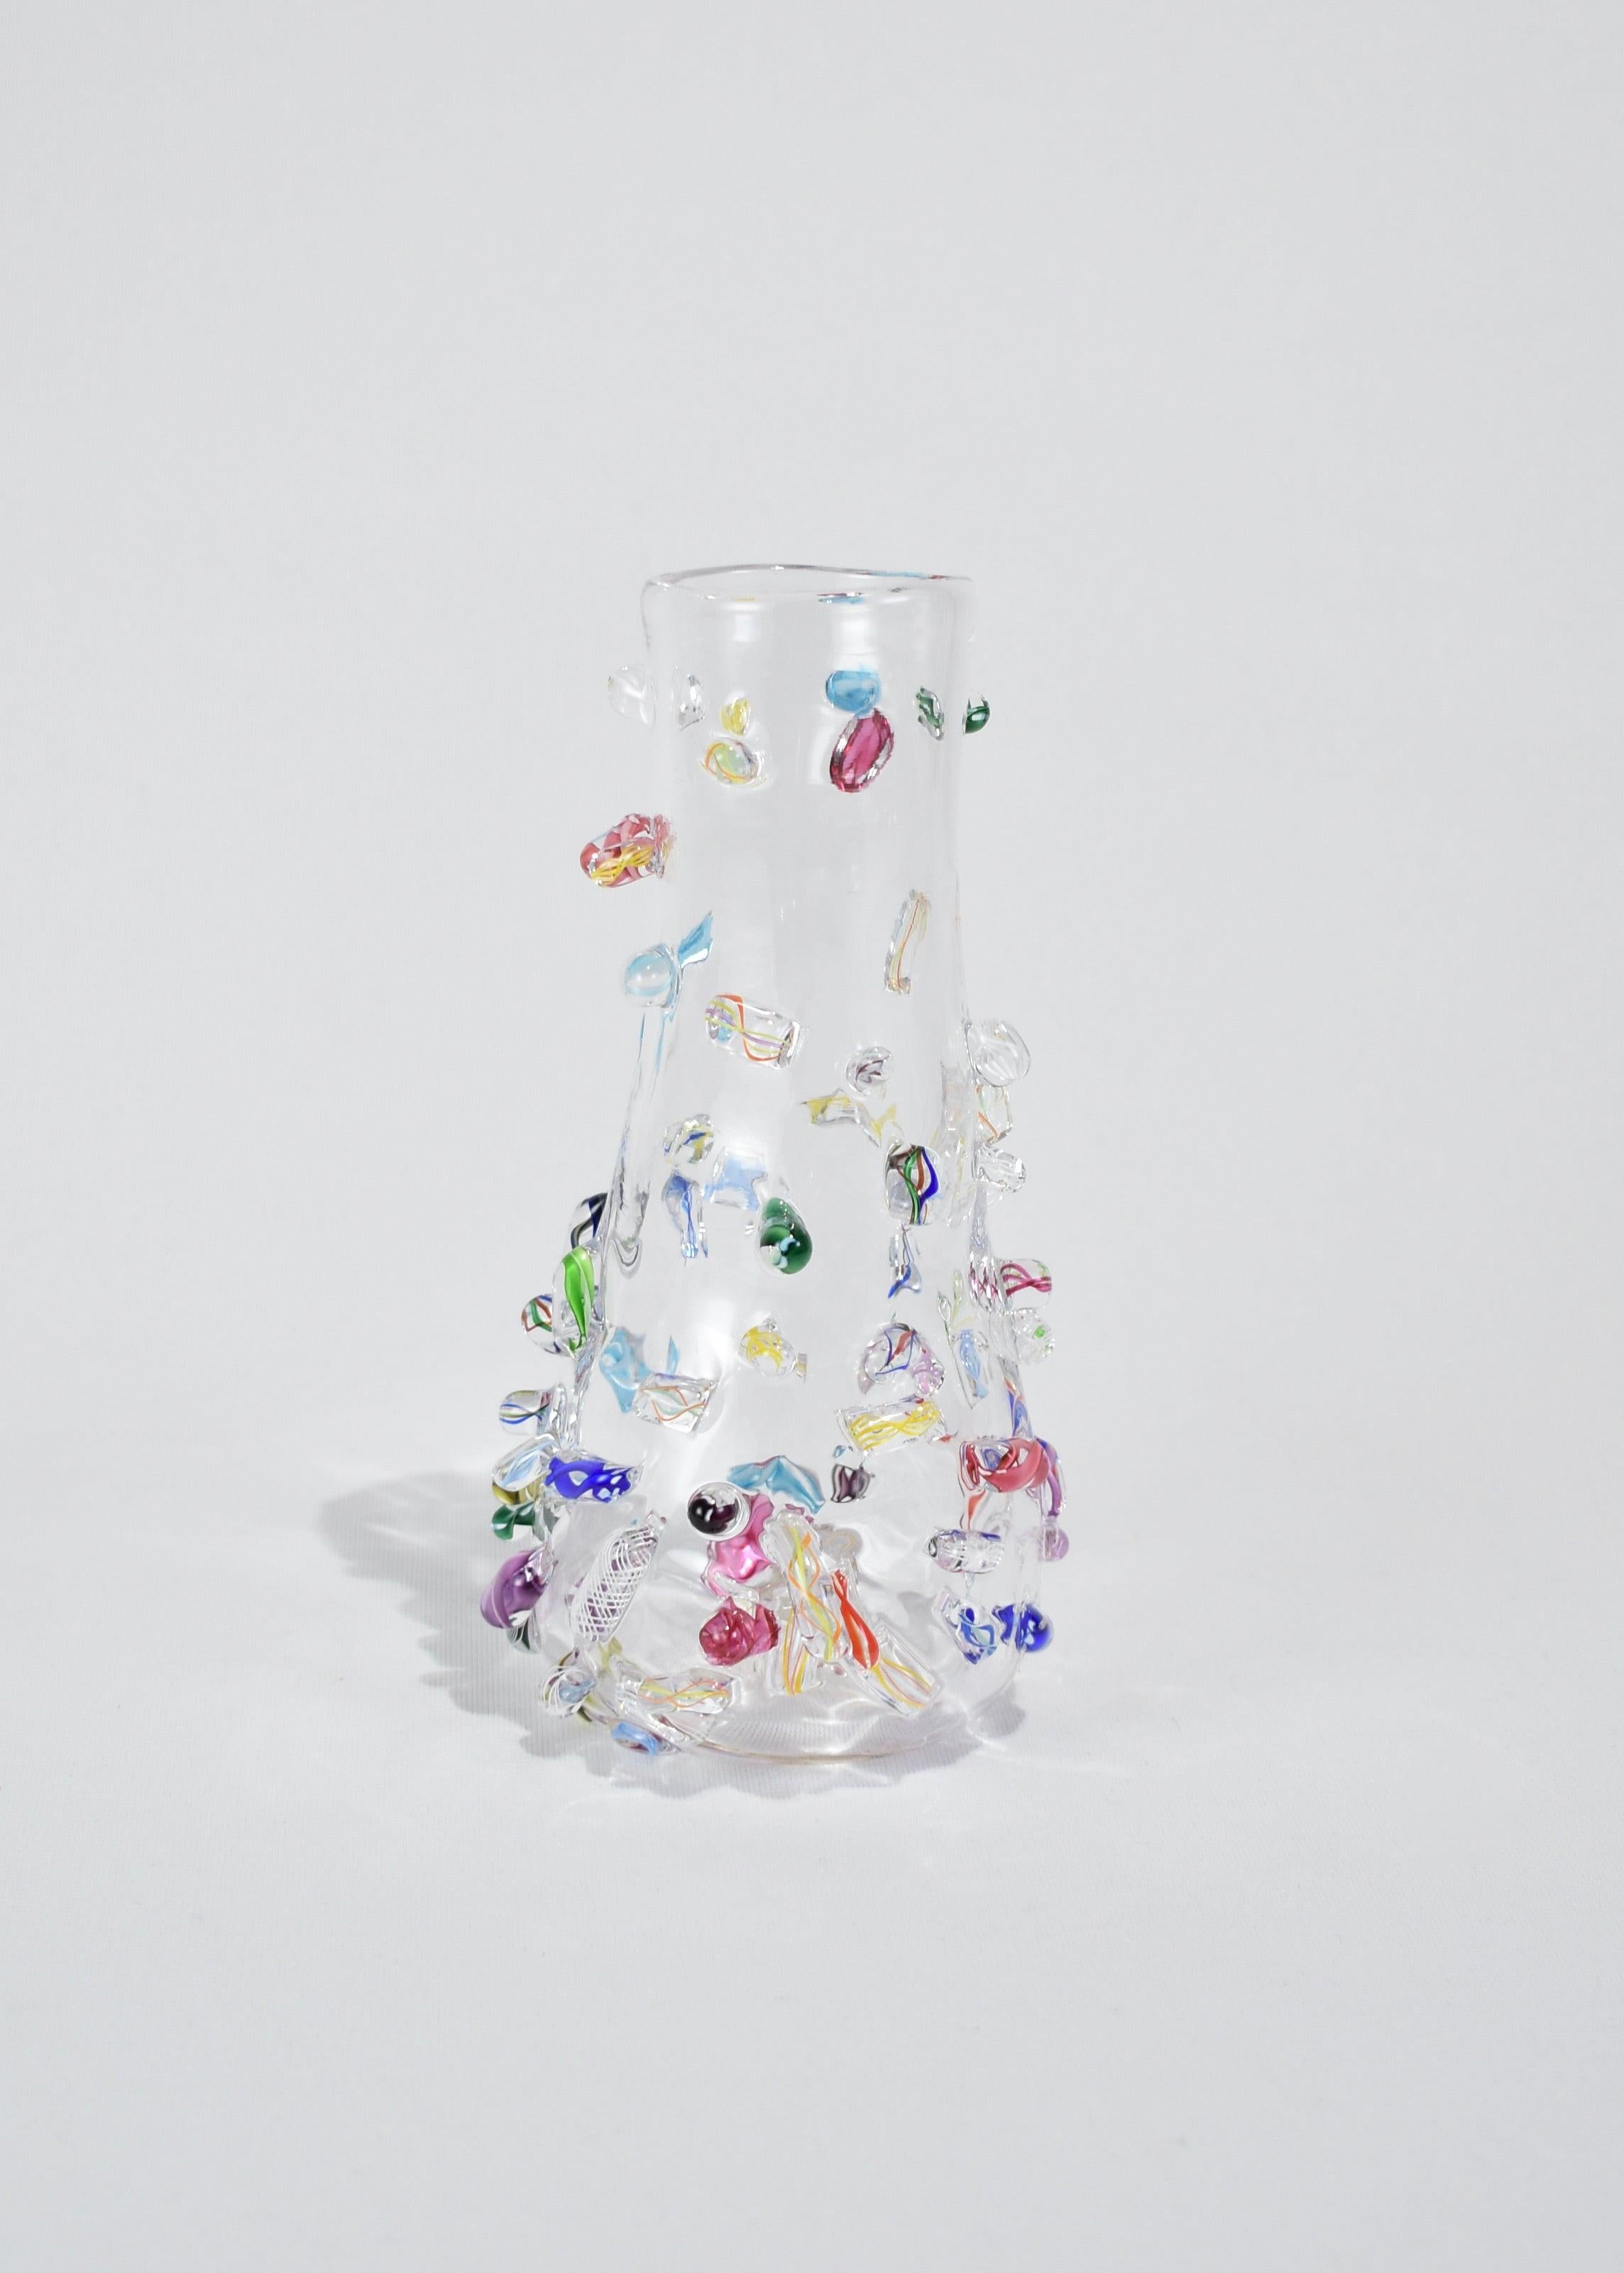 Blown glass stem vase with applied decoration. Handmade in USA by Lisa Stover. Exclusive to Casa Shop.

Please note: Due to the handmade nature, subtle variations in form and finish are to be expected.
Dimensions
Height: approximately 7 in (17.78